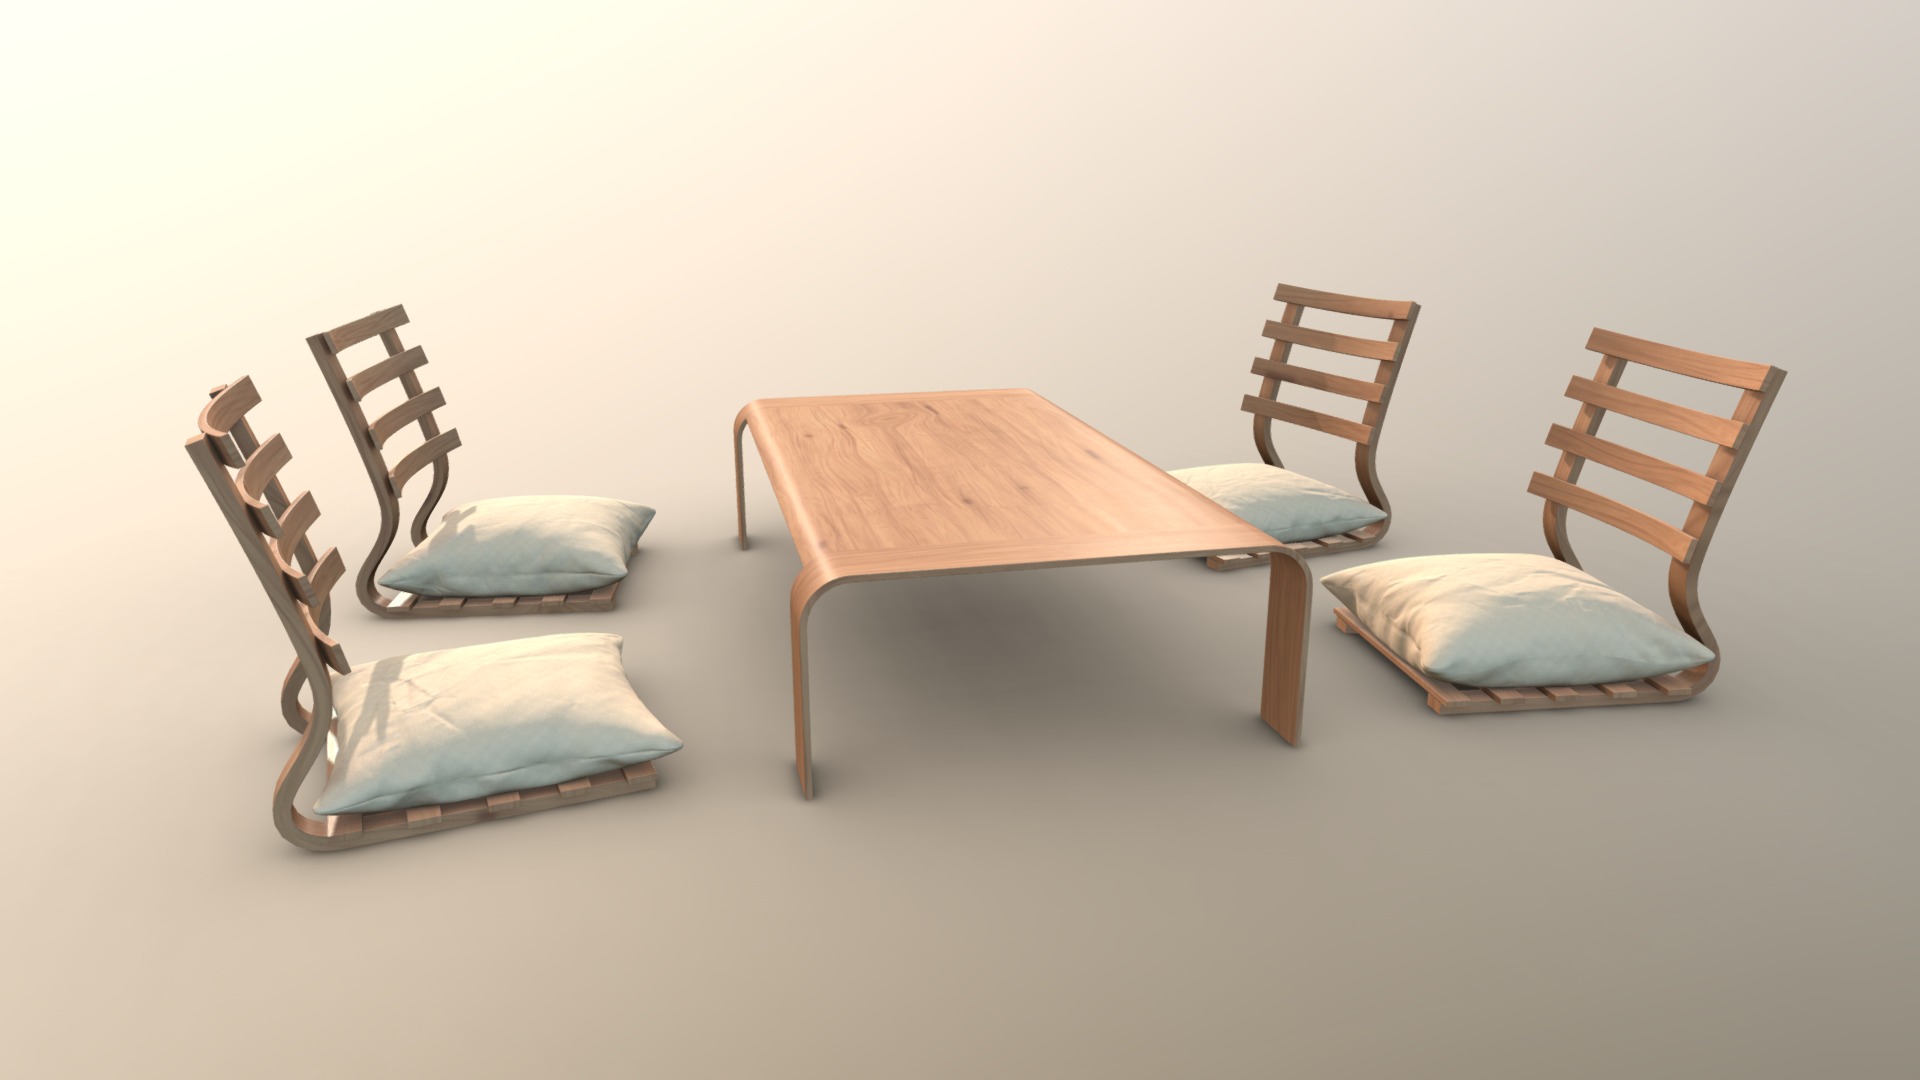 3D model Japanese table set - This is a 3D model of the Japanese table set. The 3D model is about a table and chairs.